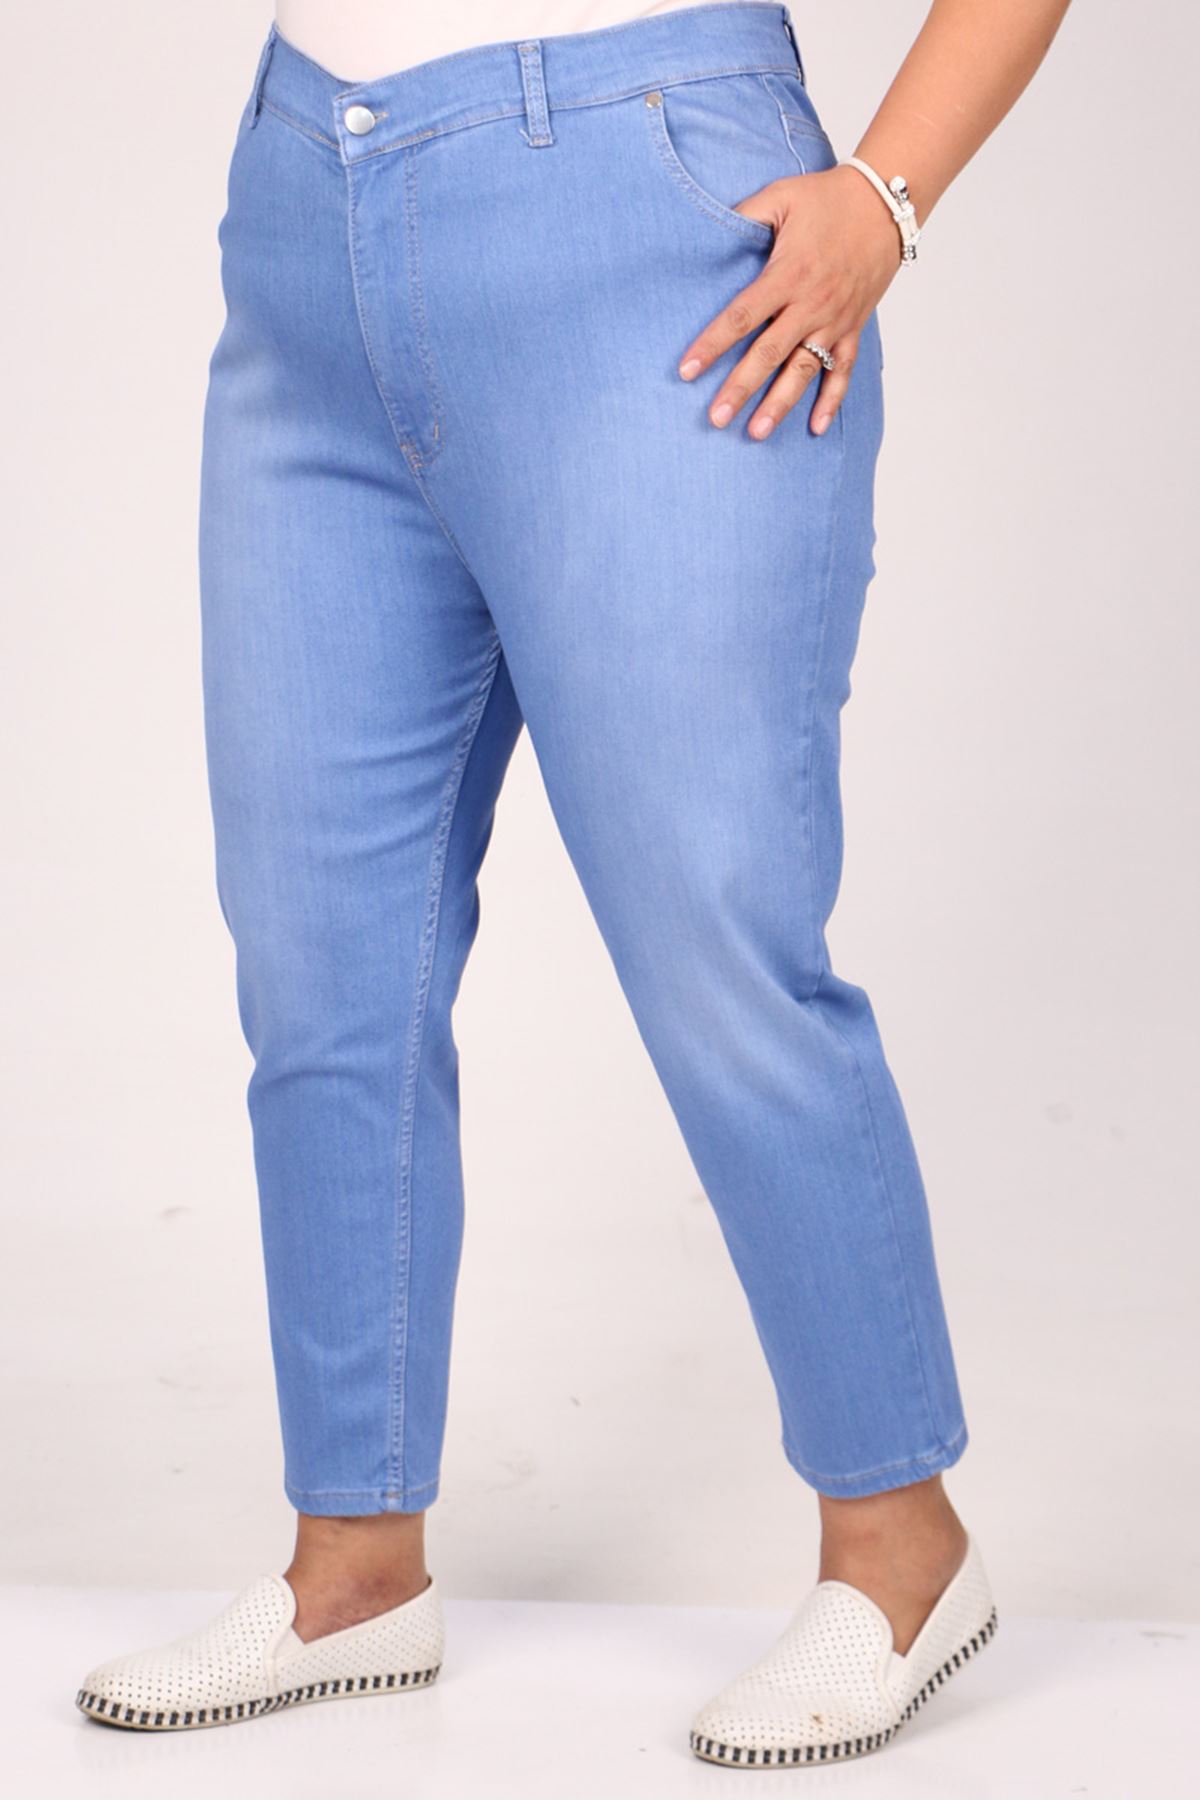 9125-3 Large Size Friend Grinding Jeans-Ice Blue